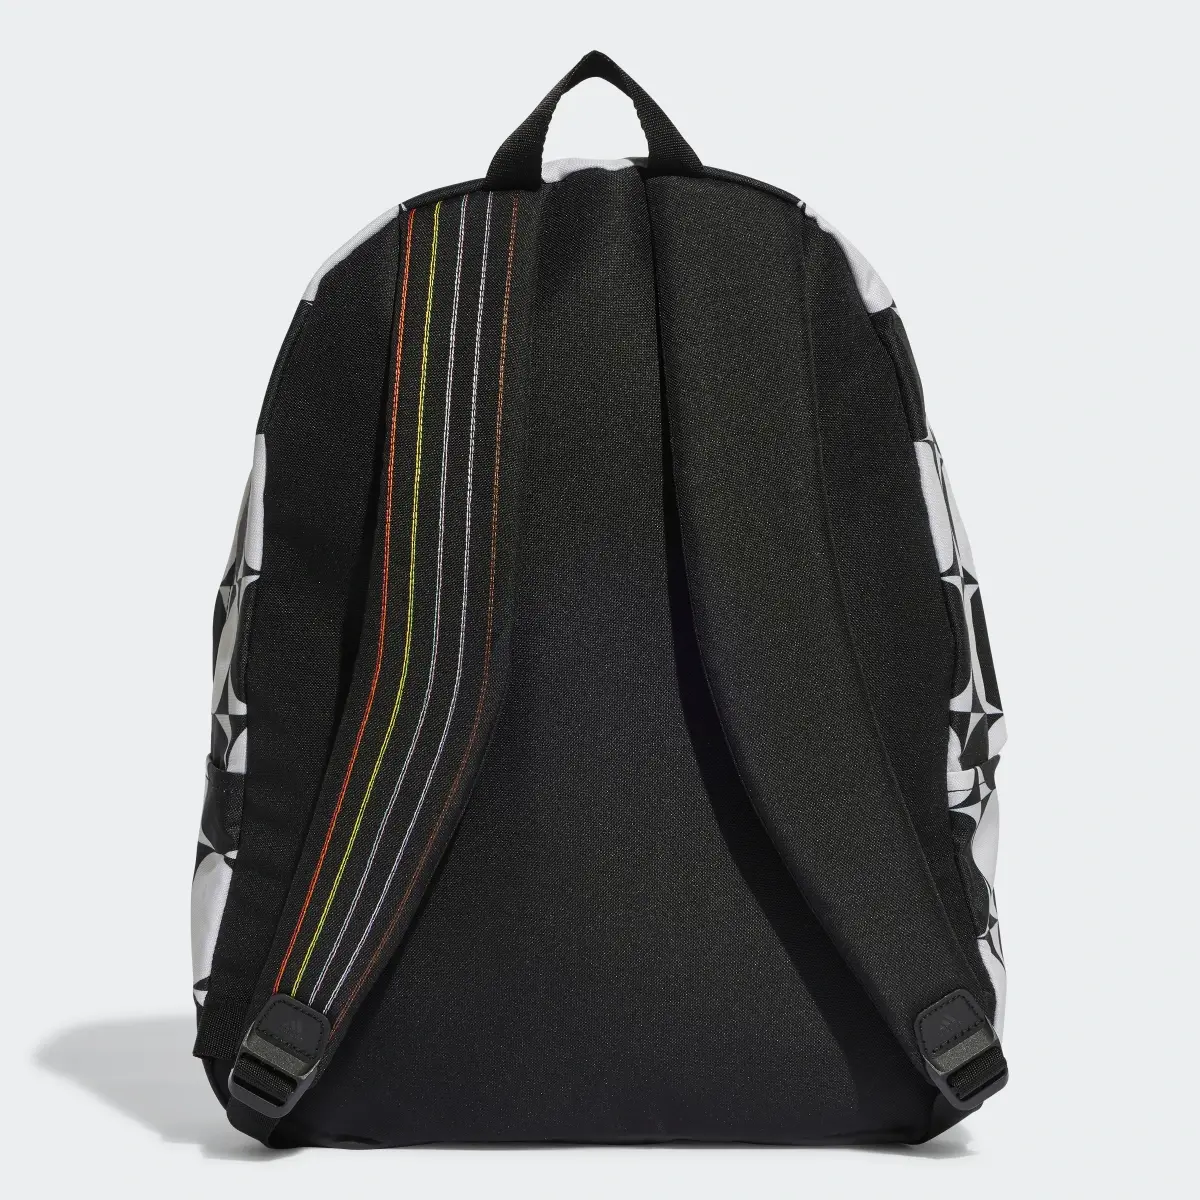 Adidas Classic Pride Backpack. 3